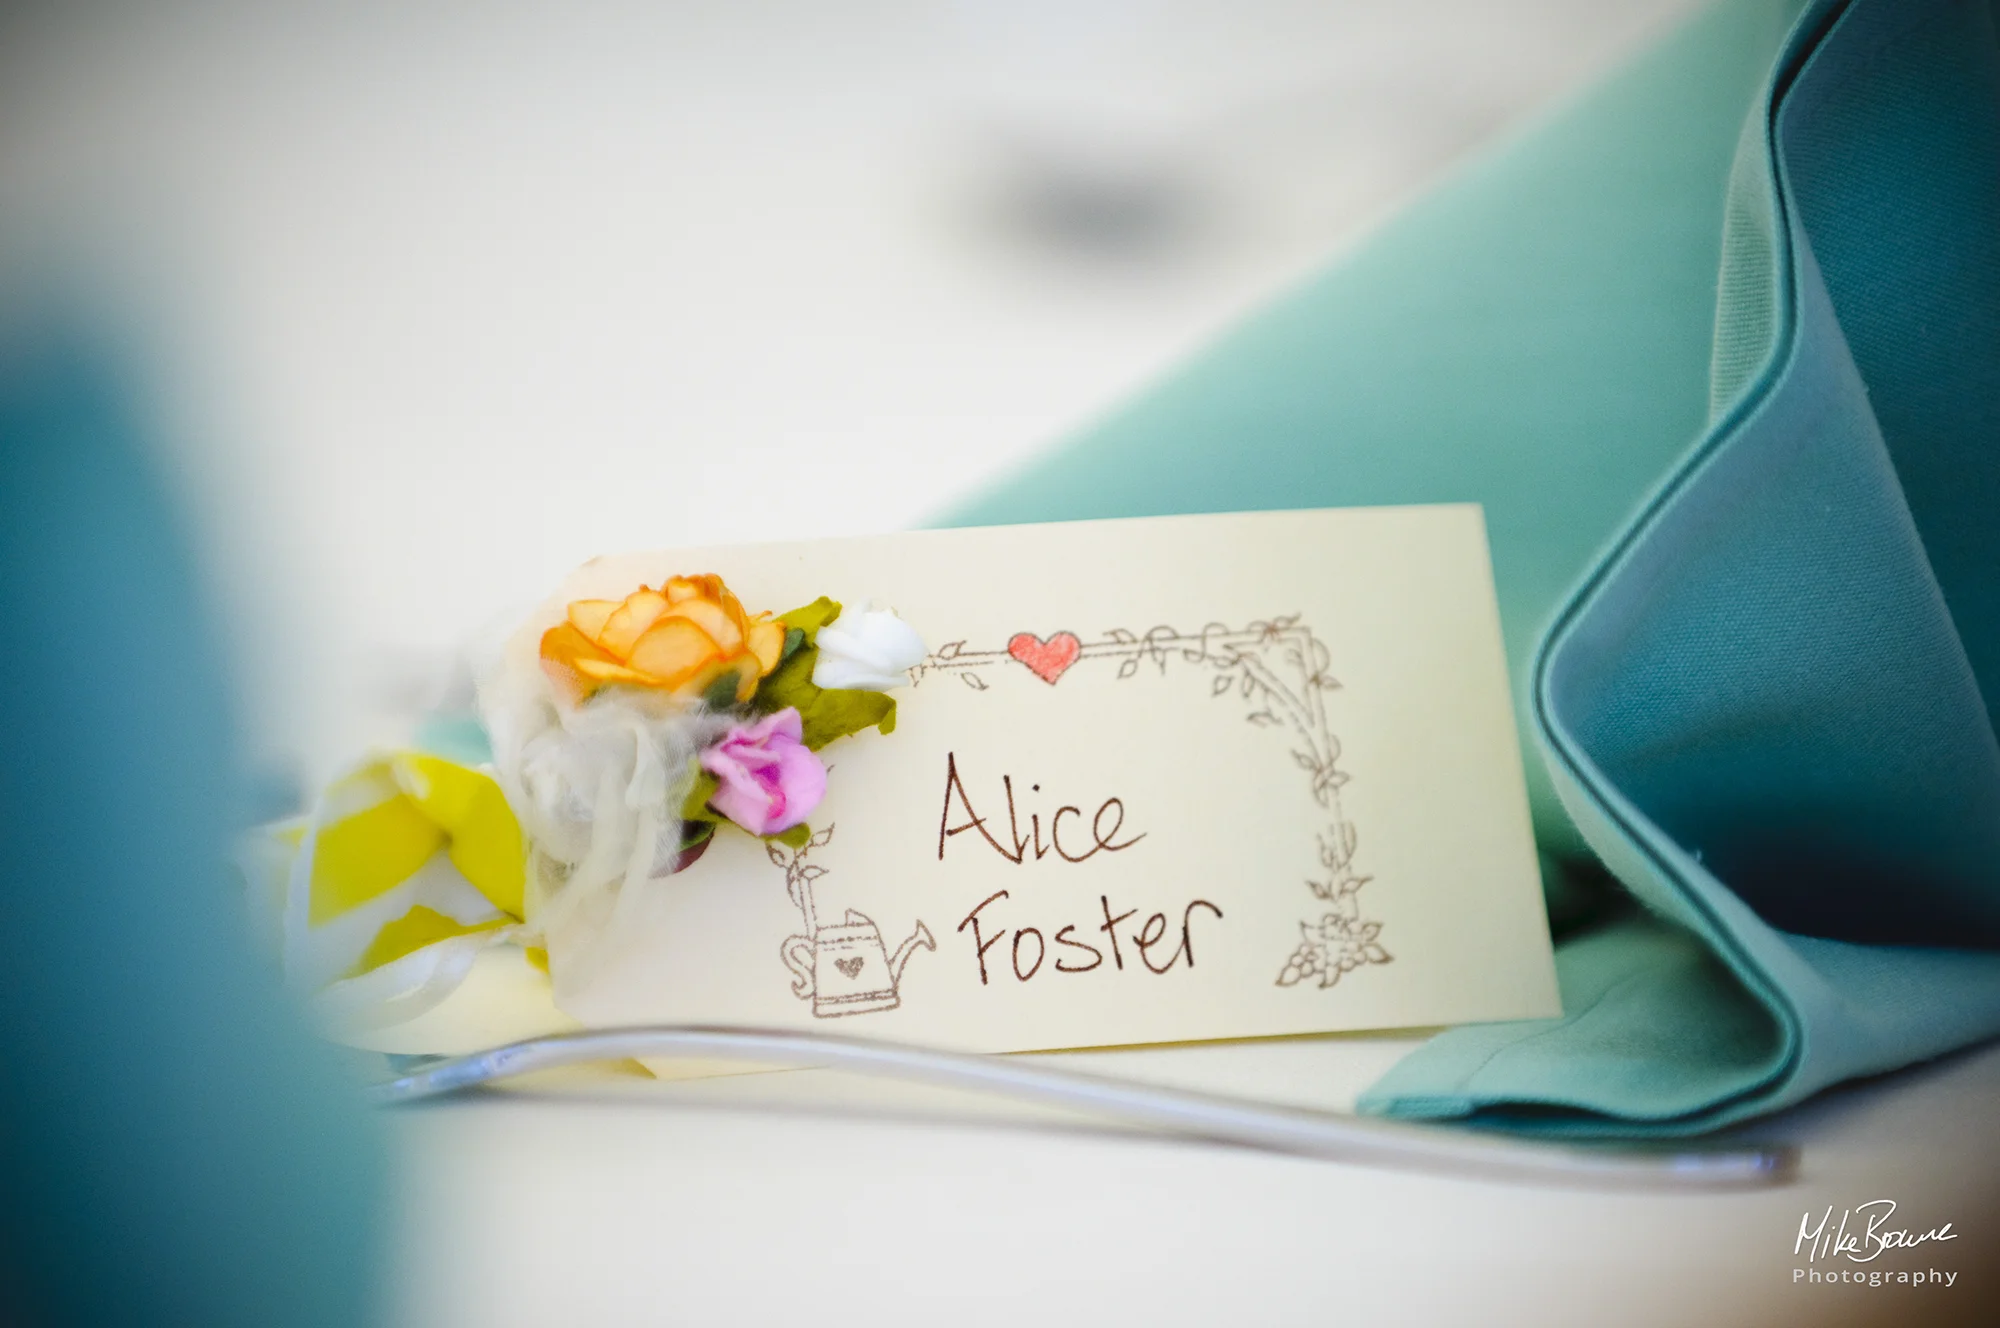 Place card with tiny bouquet of yellow pink and white flowers between two decoratively folded napkins